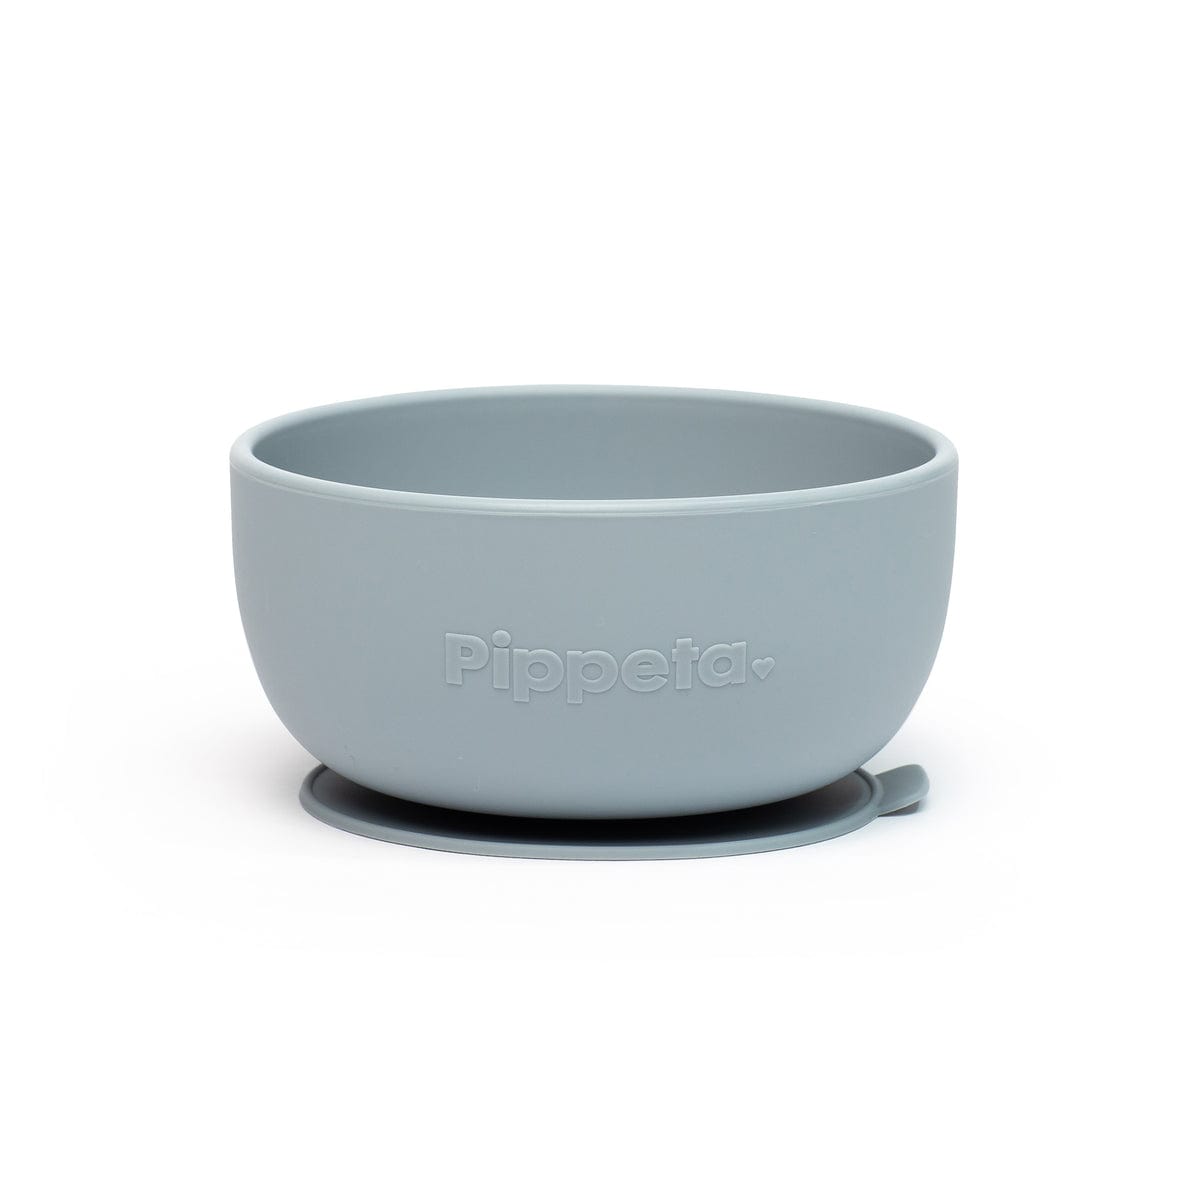 Pippeta Weaning Bowl Silicone Suction Bowl (Sea Salt)